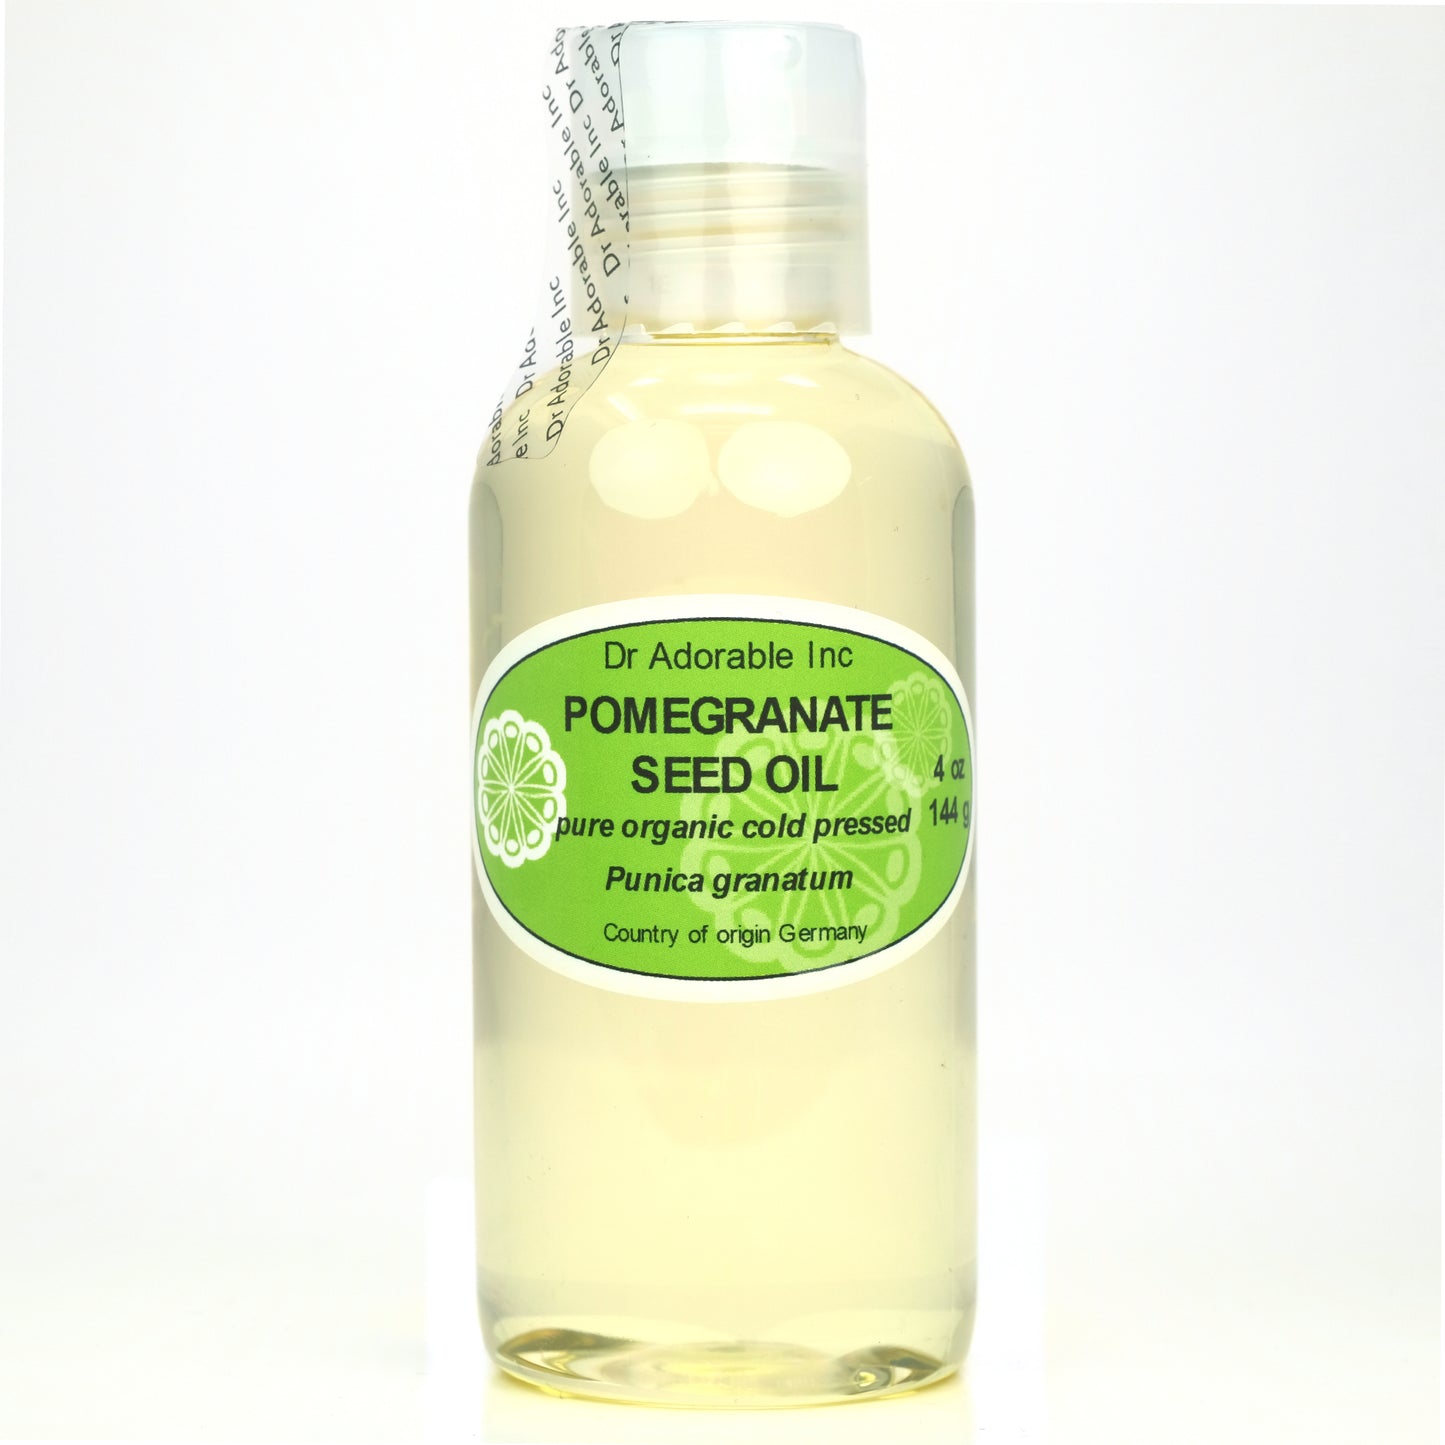 Pomegranate Seed Oil - 100% Pure Natural Organic Cold Pressed